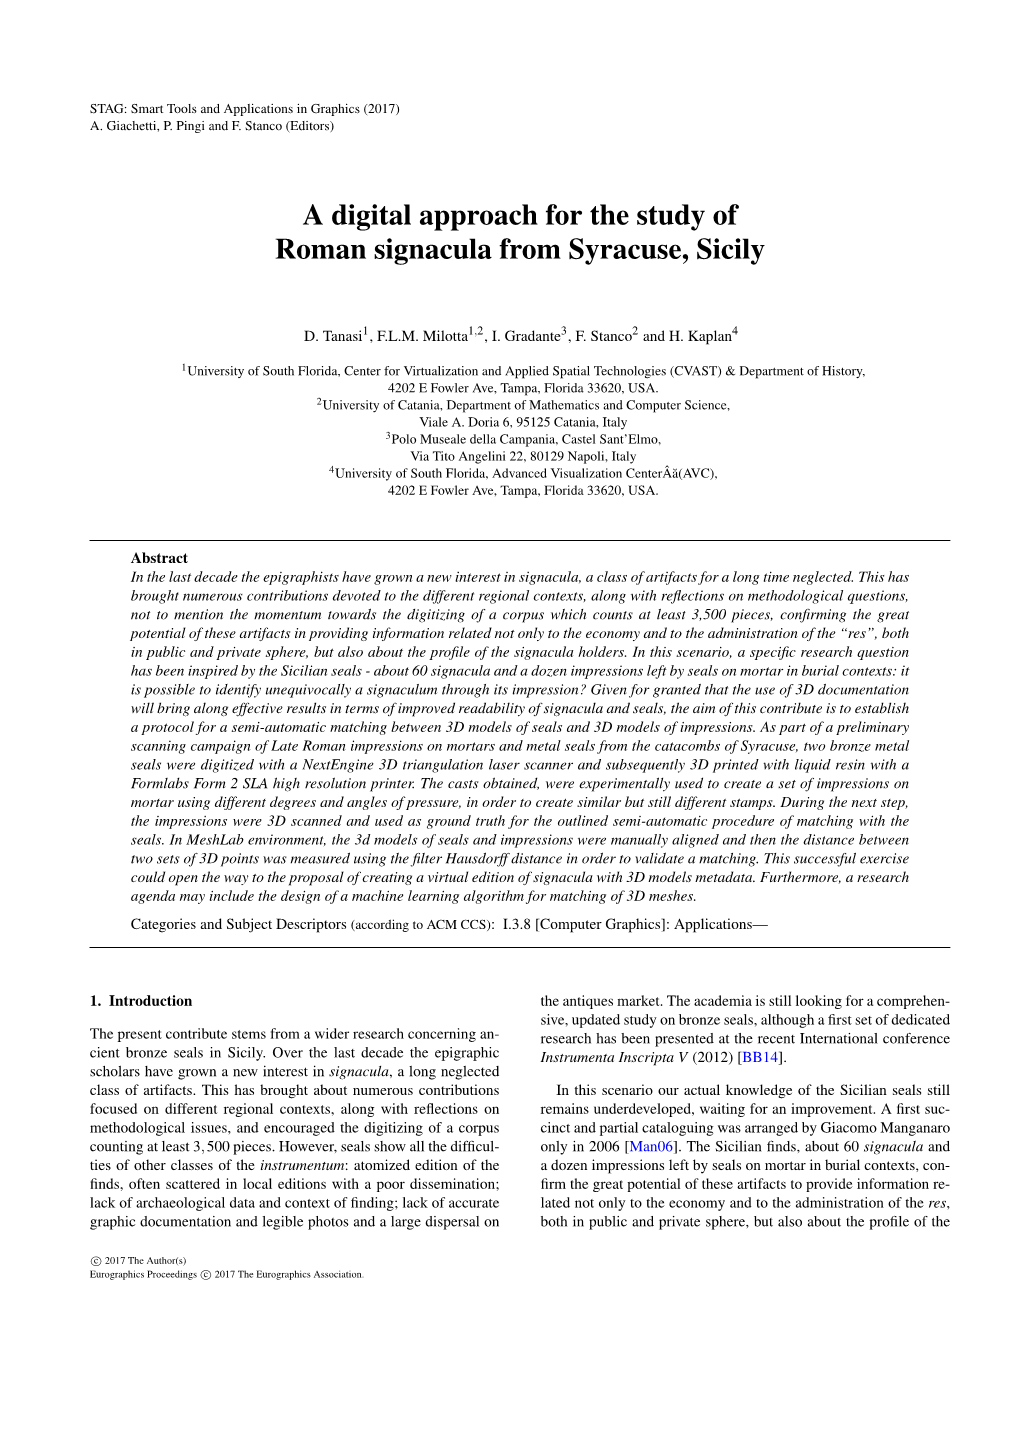 A Digital Approach for the Study of Roman Signacula from Syracuse, Sicily